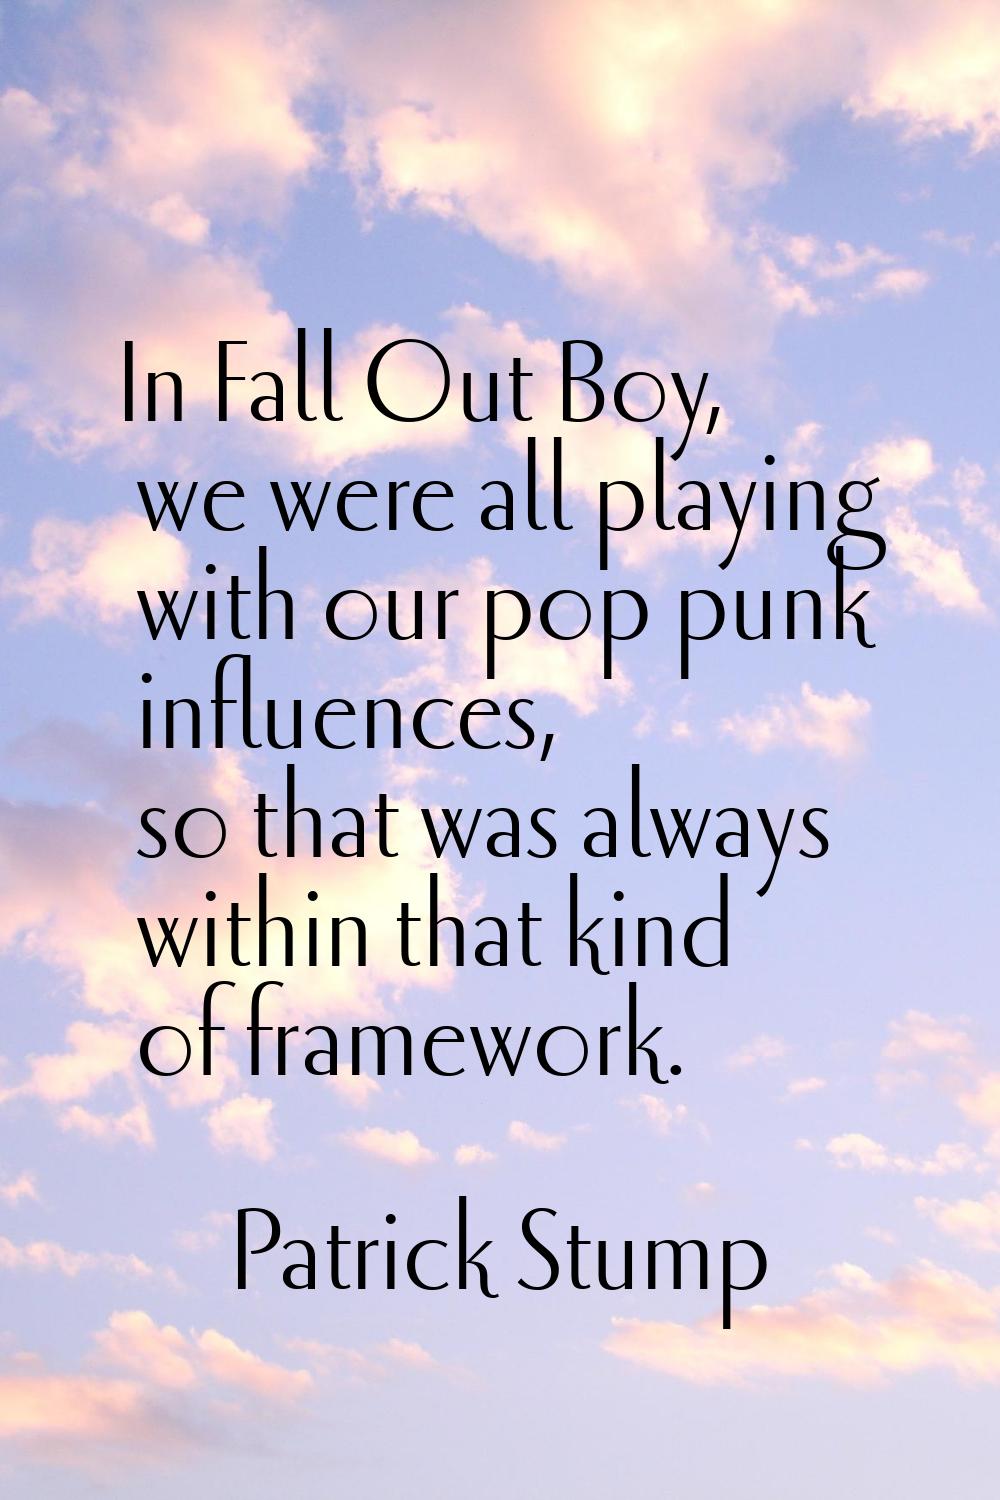 In Fall Out Boy, we were all playing with our pop punk influences, so that was always within that k